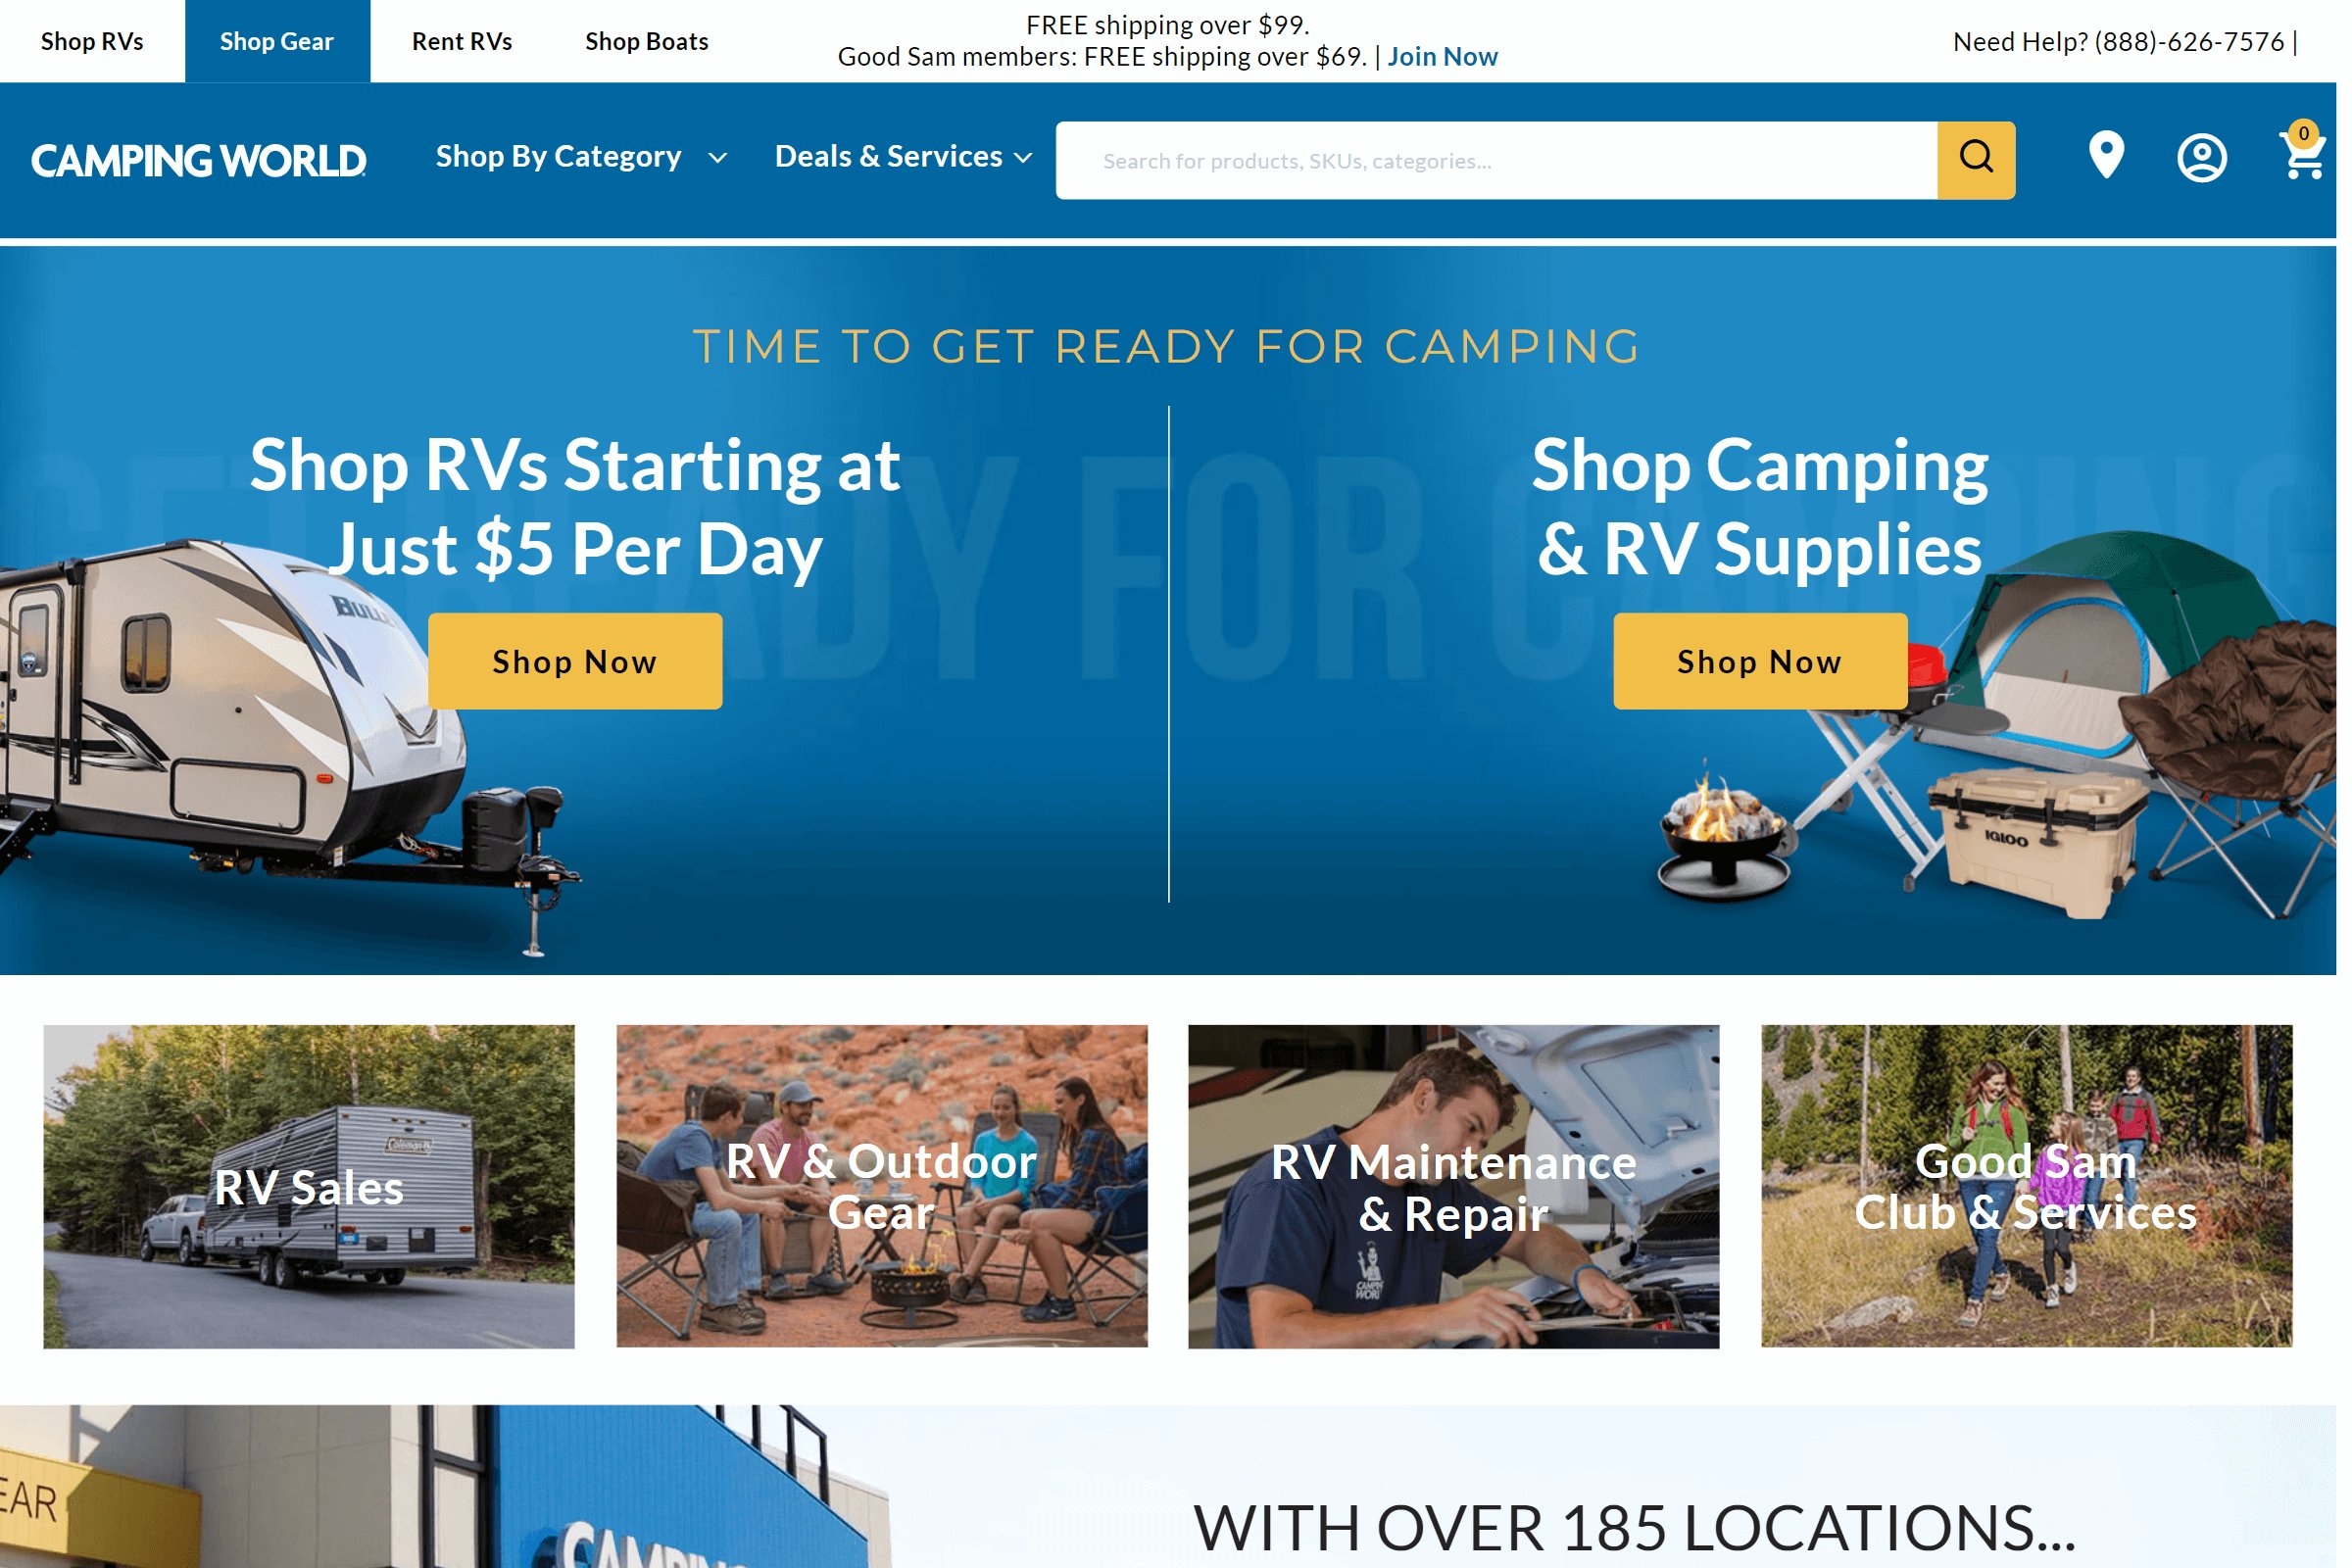 Camping World on ReadSomeReviews